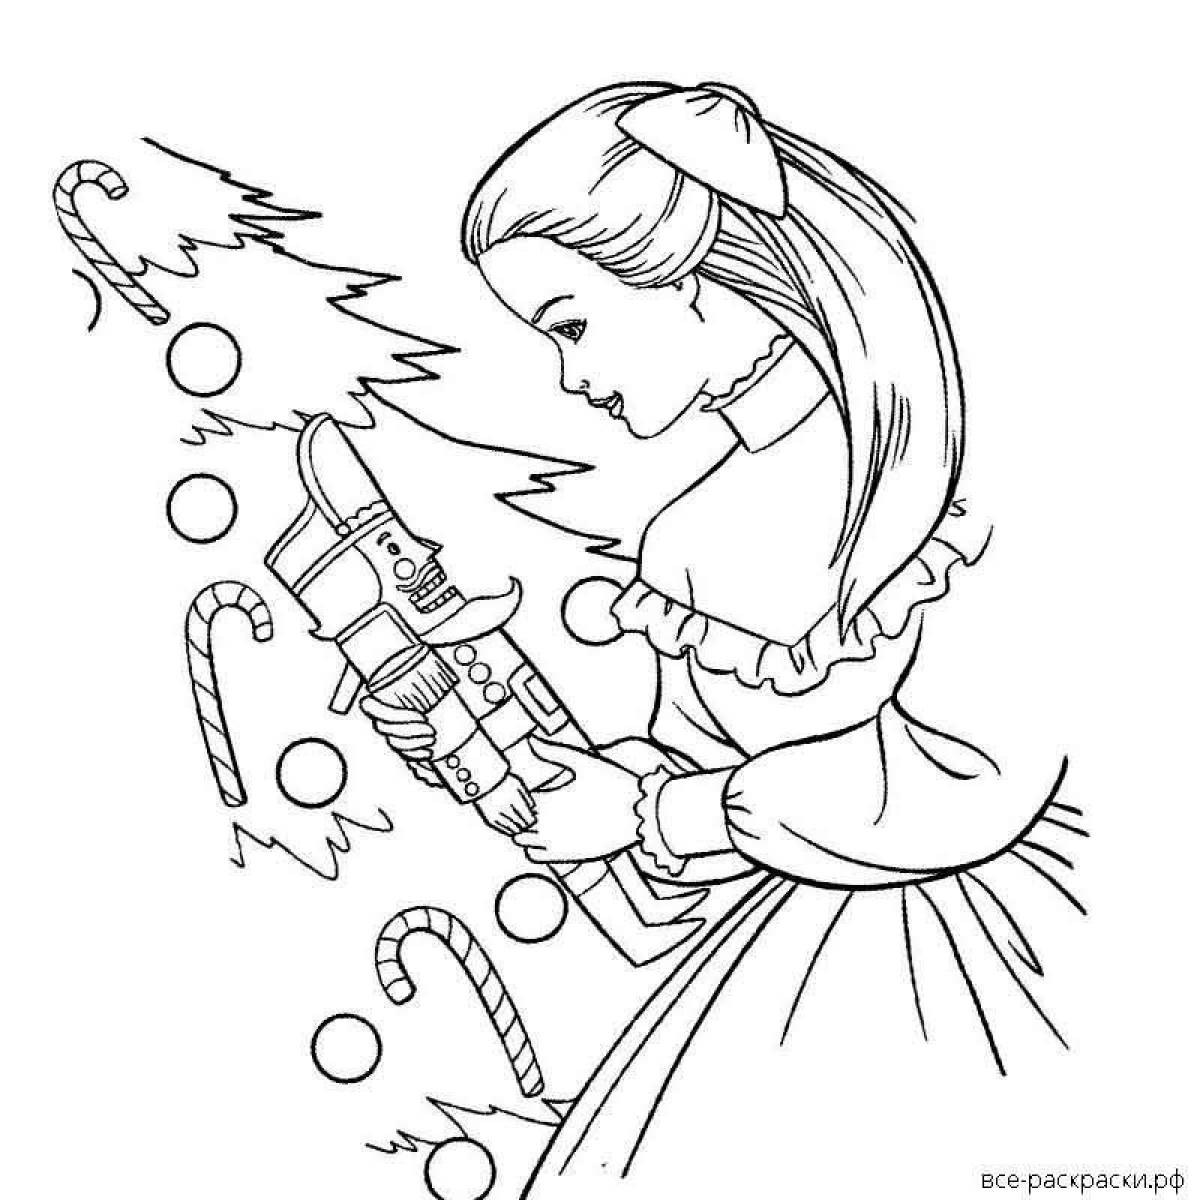 Color-frenzy nutcracker coloring for kids